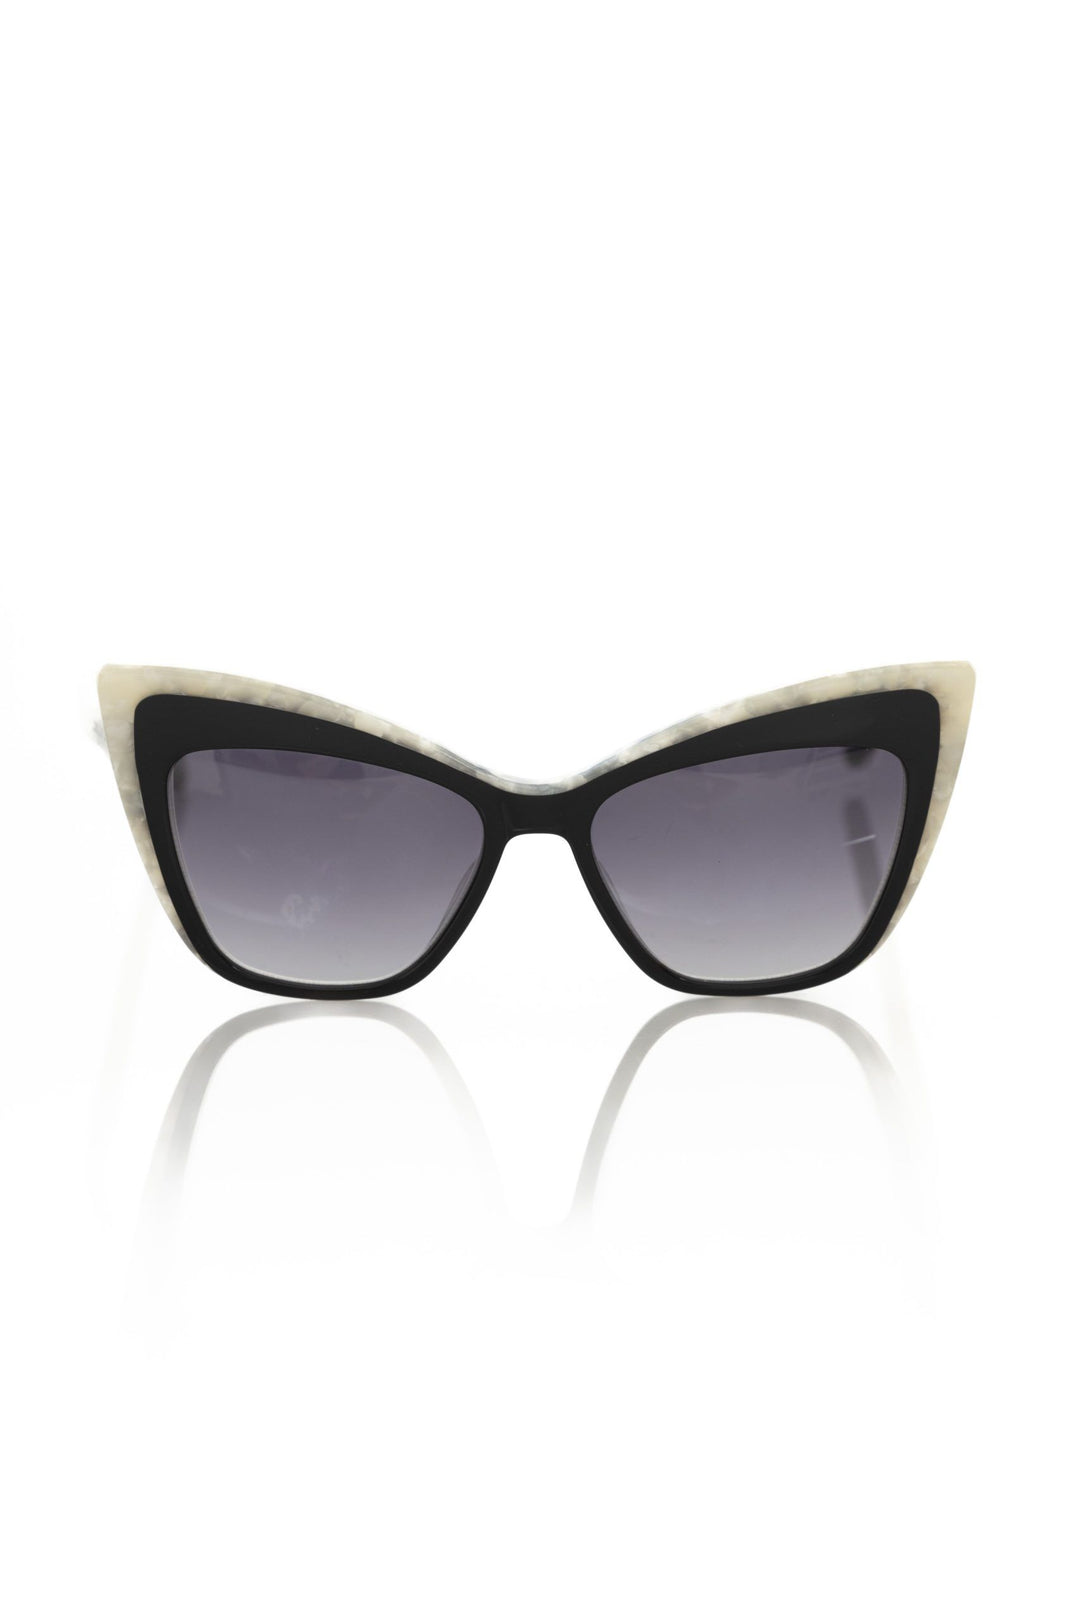 Frankie Morello Chic Cat Eye Sunglasses with Pearly Accents